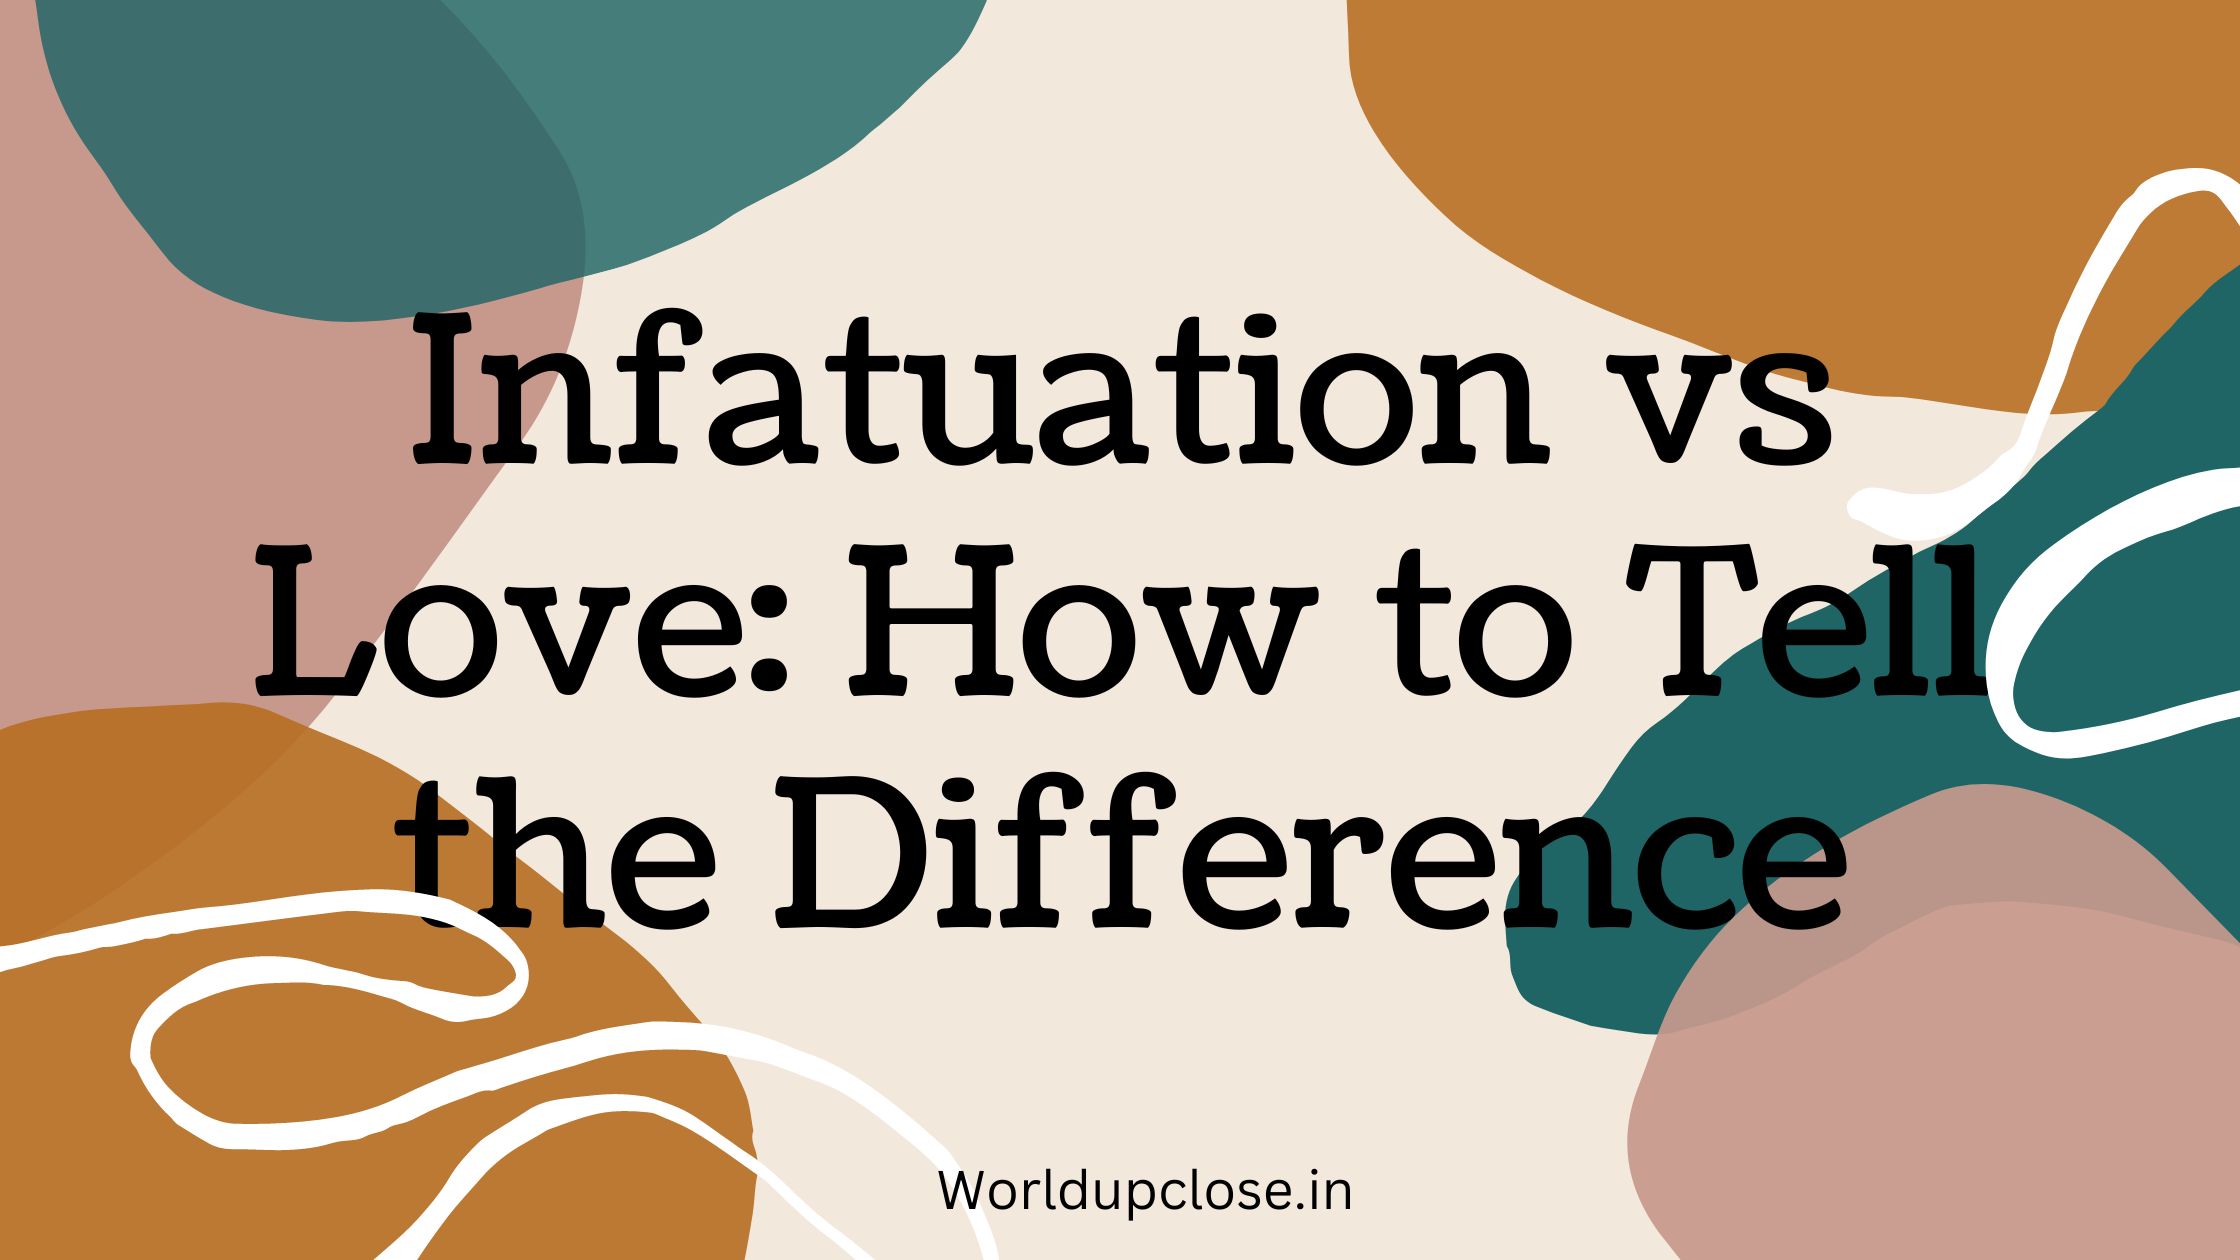 Infatuation vs Love: How to Tell the Difference 45